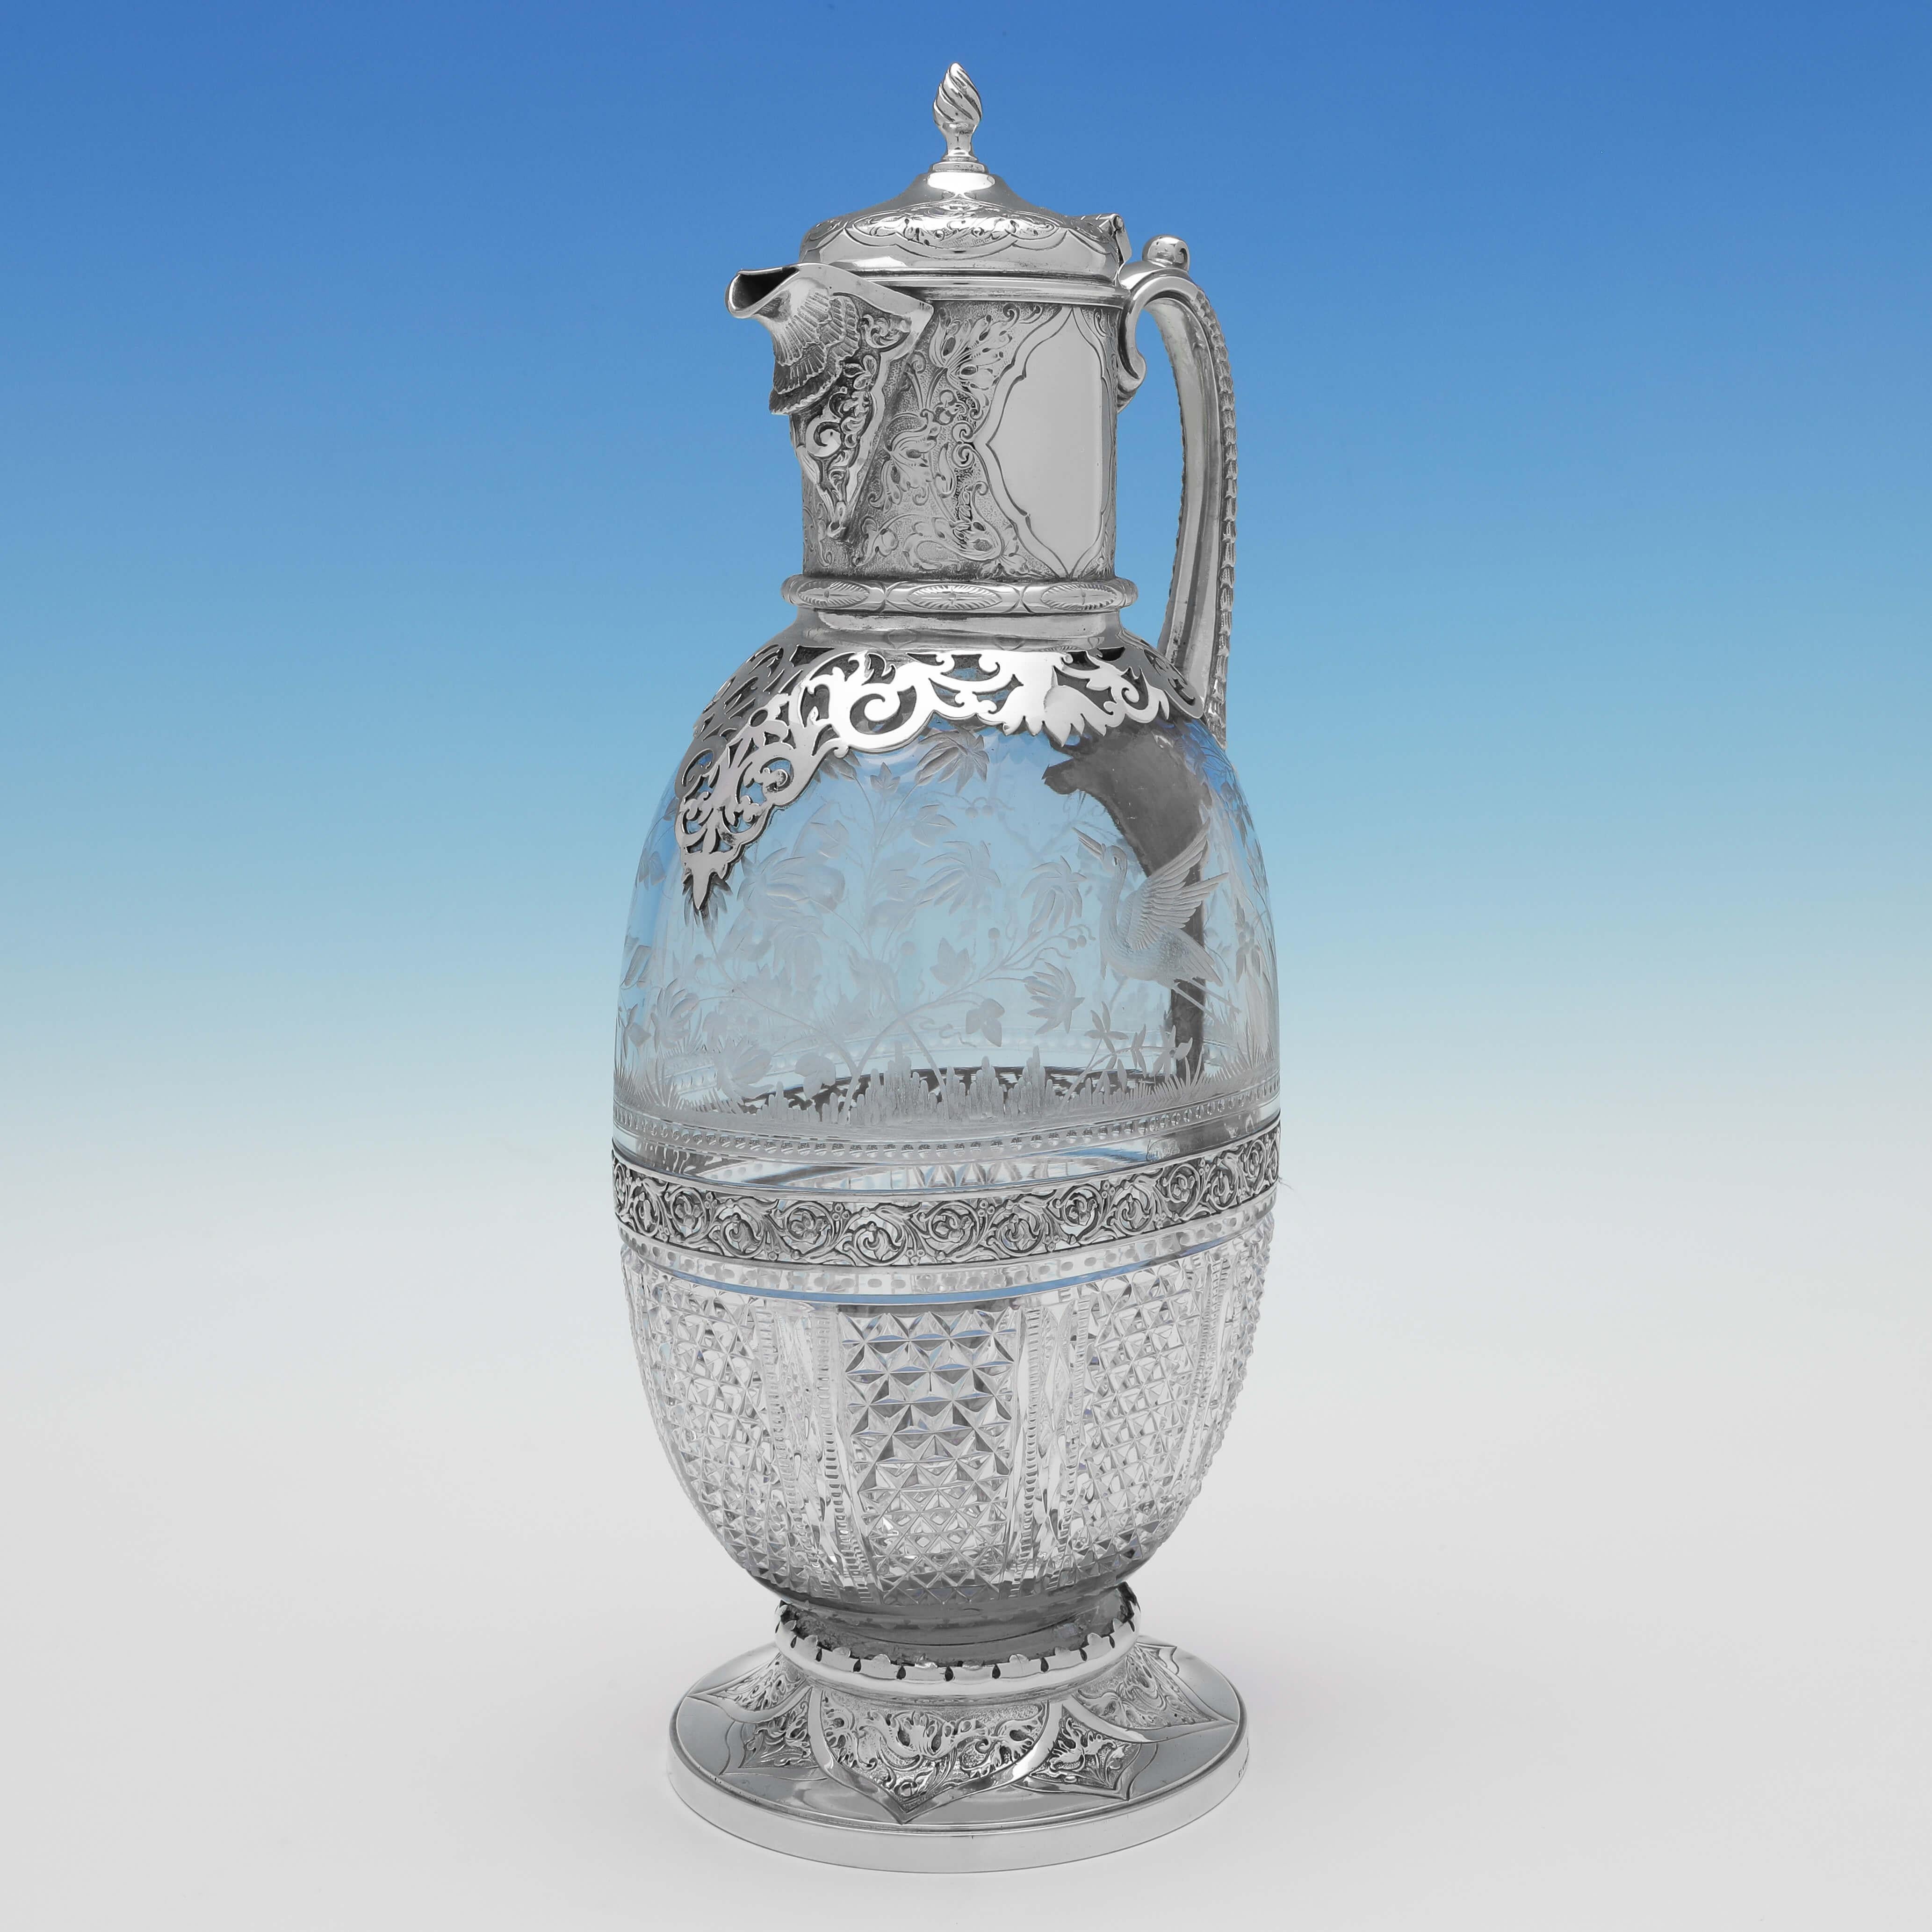 Carrying old plate marks for 1866 by Elkington & Co., this exceptional Victorian, antique silver plate claret jugantique silver plate claret jug, features a cut glass and etched glass body in the Aesthetic Movement taste, and an ornate silver plate